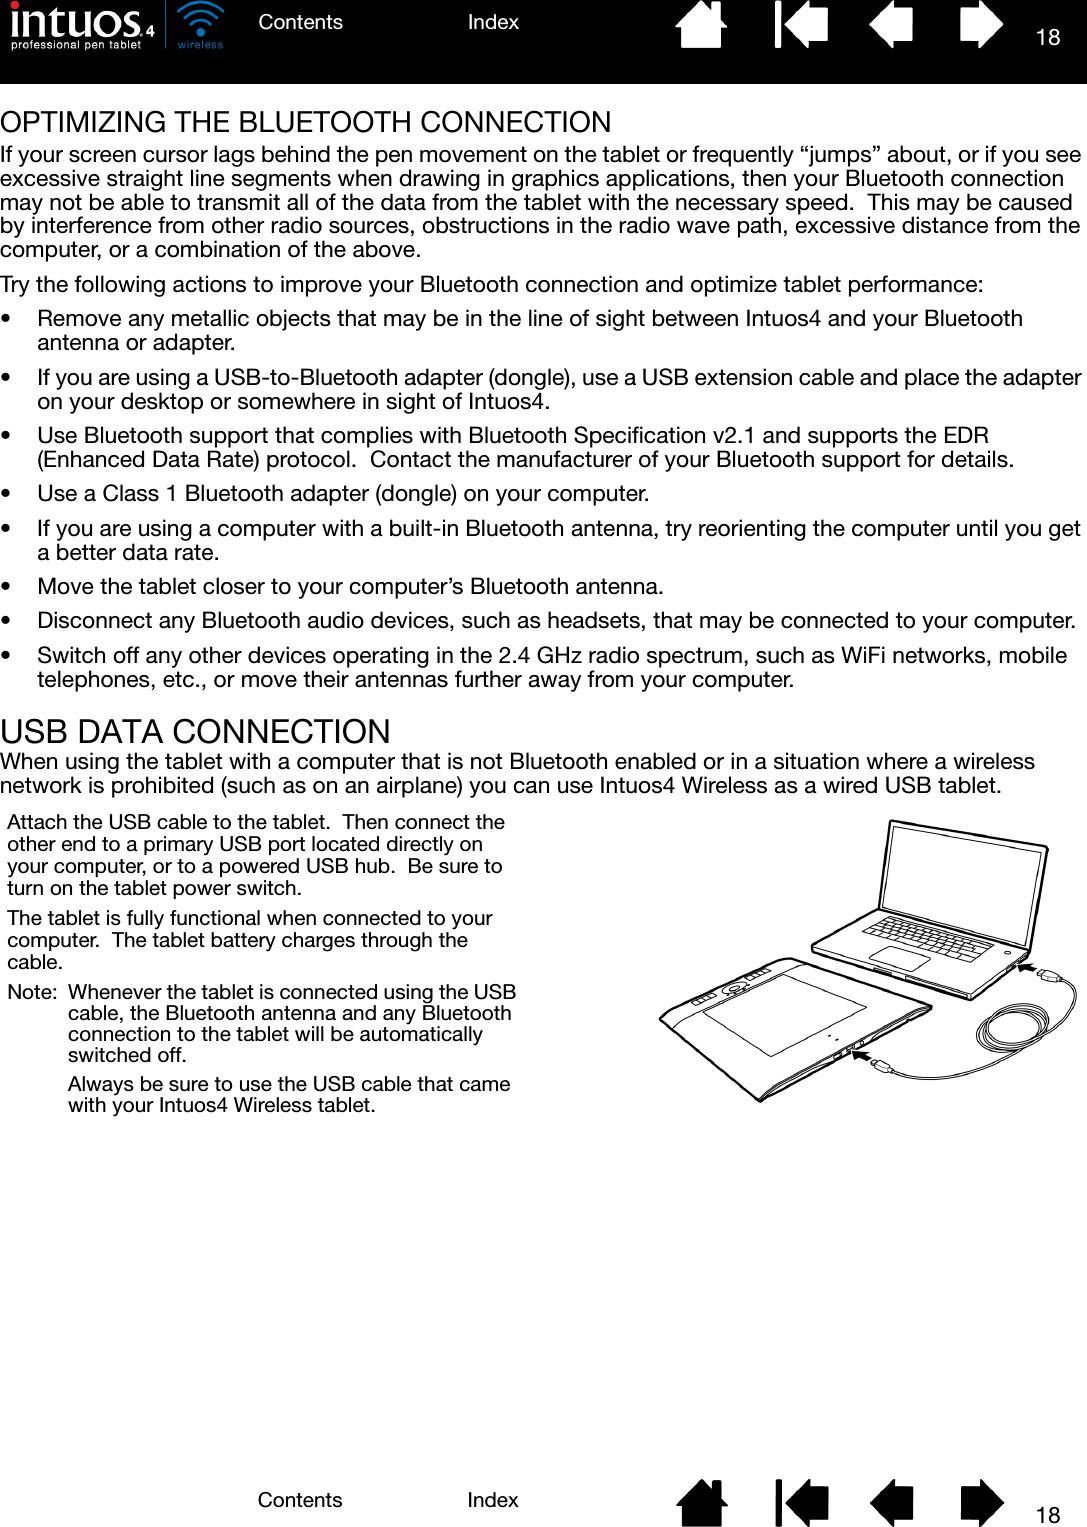 18IndexContents18IndexContentsOPTIMIZING THE BLUETOOTH CONNECTIONIf your screen cursor lags behind the pen movement on the tablet or frequently “jumps” about, or if you see excessive straight line segments when drawing in graphics applications, then your Bluetooth connection may not be able to transmit all of the data from the tablet with the necessary speed.  This may be caused by interference from other radio sources, obstructions in the radio wave path, excessive distance from the computer, or a combination of the above.Try the following actions to improve your Bluetooth connection and optimize tablet performance:• Remove any metallic objects that may be in the line of sight between Intuos4 and your Bluetooth antenna or adapter.• If you are using a USB-to-Bluetooth adapter (dongle), use a USB extension cable and place the adapter on your desktop or somewhere in sight of Intuos4.• Use Bluetooth support that complies with Bluetooth Specification v2.1 and supports the EDR (Enhanced Data Rate) protocol.  Contact the manufacturer of your Bluetooth support for details.• Use a Class 1 Bluetooth adapter (dongle) on your computer.• If you are using a computer with a built-in Bluetooth antenna, try reorienting the computer until you get a better data rate.• Move the tablet closer to your computer’s Bluetooth antenna.• Disconnect any Bluetooth audio devices, such as headsets, that may be connected to your computer.• Switch off any other devices operating in the 2.4 GHz radio spectrum, such as WiFi networks, mobile telephones, etc., or move their antennas further away from your computer.USB DATA CONNECTIONWhen using the tablet with a computer that is not Bluetooth enabled or in a situation where a wireless network is prohibited (such as on an airplane) you can use Intuos4 Wireless as a wired USB tablet.Attach the USB cable to the tablet.  Then connect the other end to a primary USB port located directly on your computer, or to a powered USB hub.  Be sure to turn on the tablet power switch.The tablet is fully functional when connected to your computer.  The tablet battery charges through the cable.Note:  Whenever the tablet is connected using the USB cable, the Bluetooth antenna and any Bluetooth connection to the tablet will be automatically switched off.Always be sure to use the USB cable that came with your Intuos4 Wireless tablet.